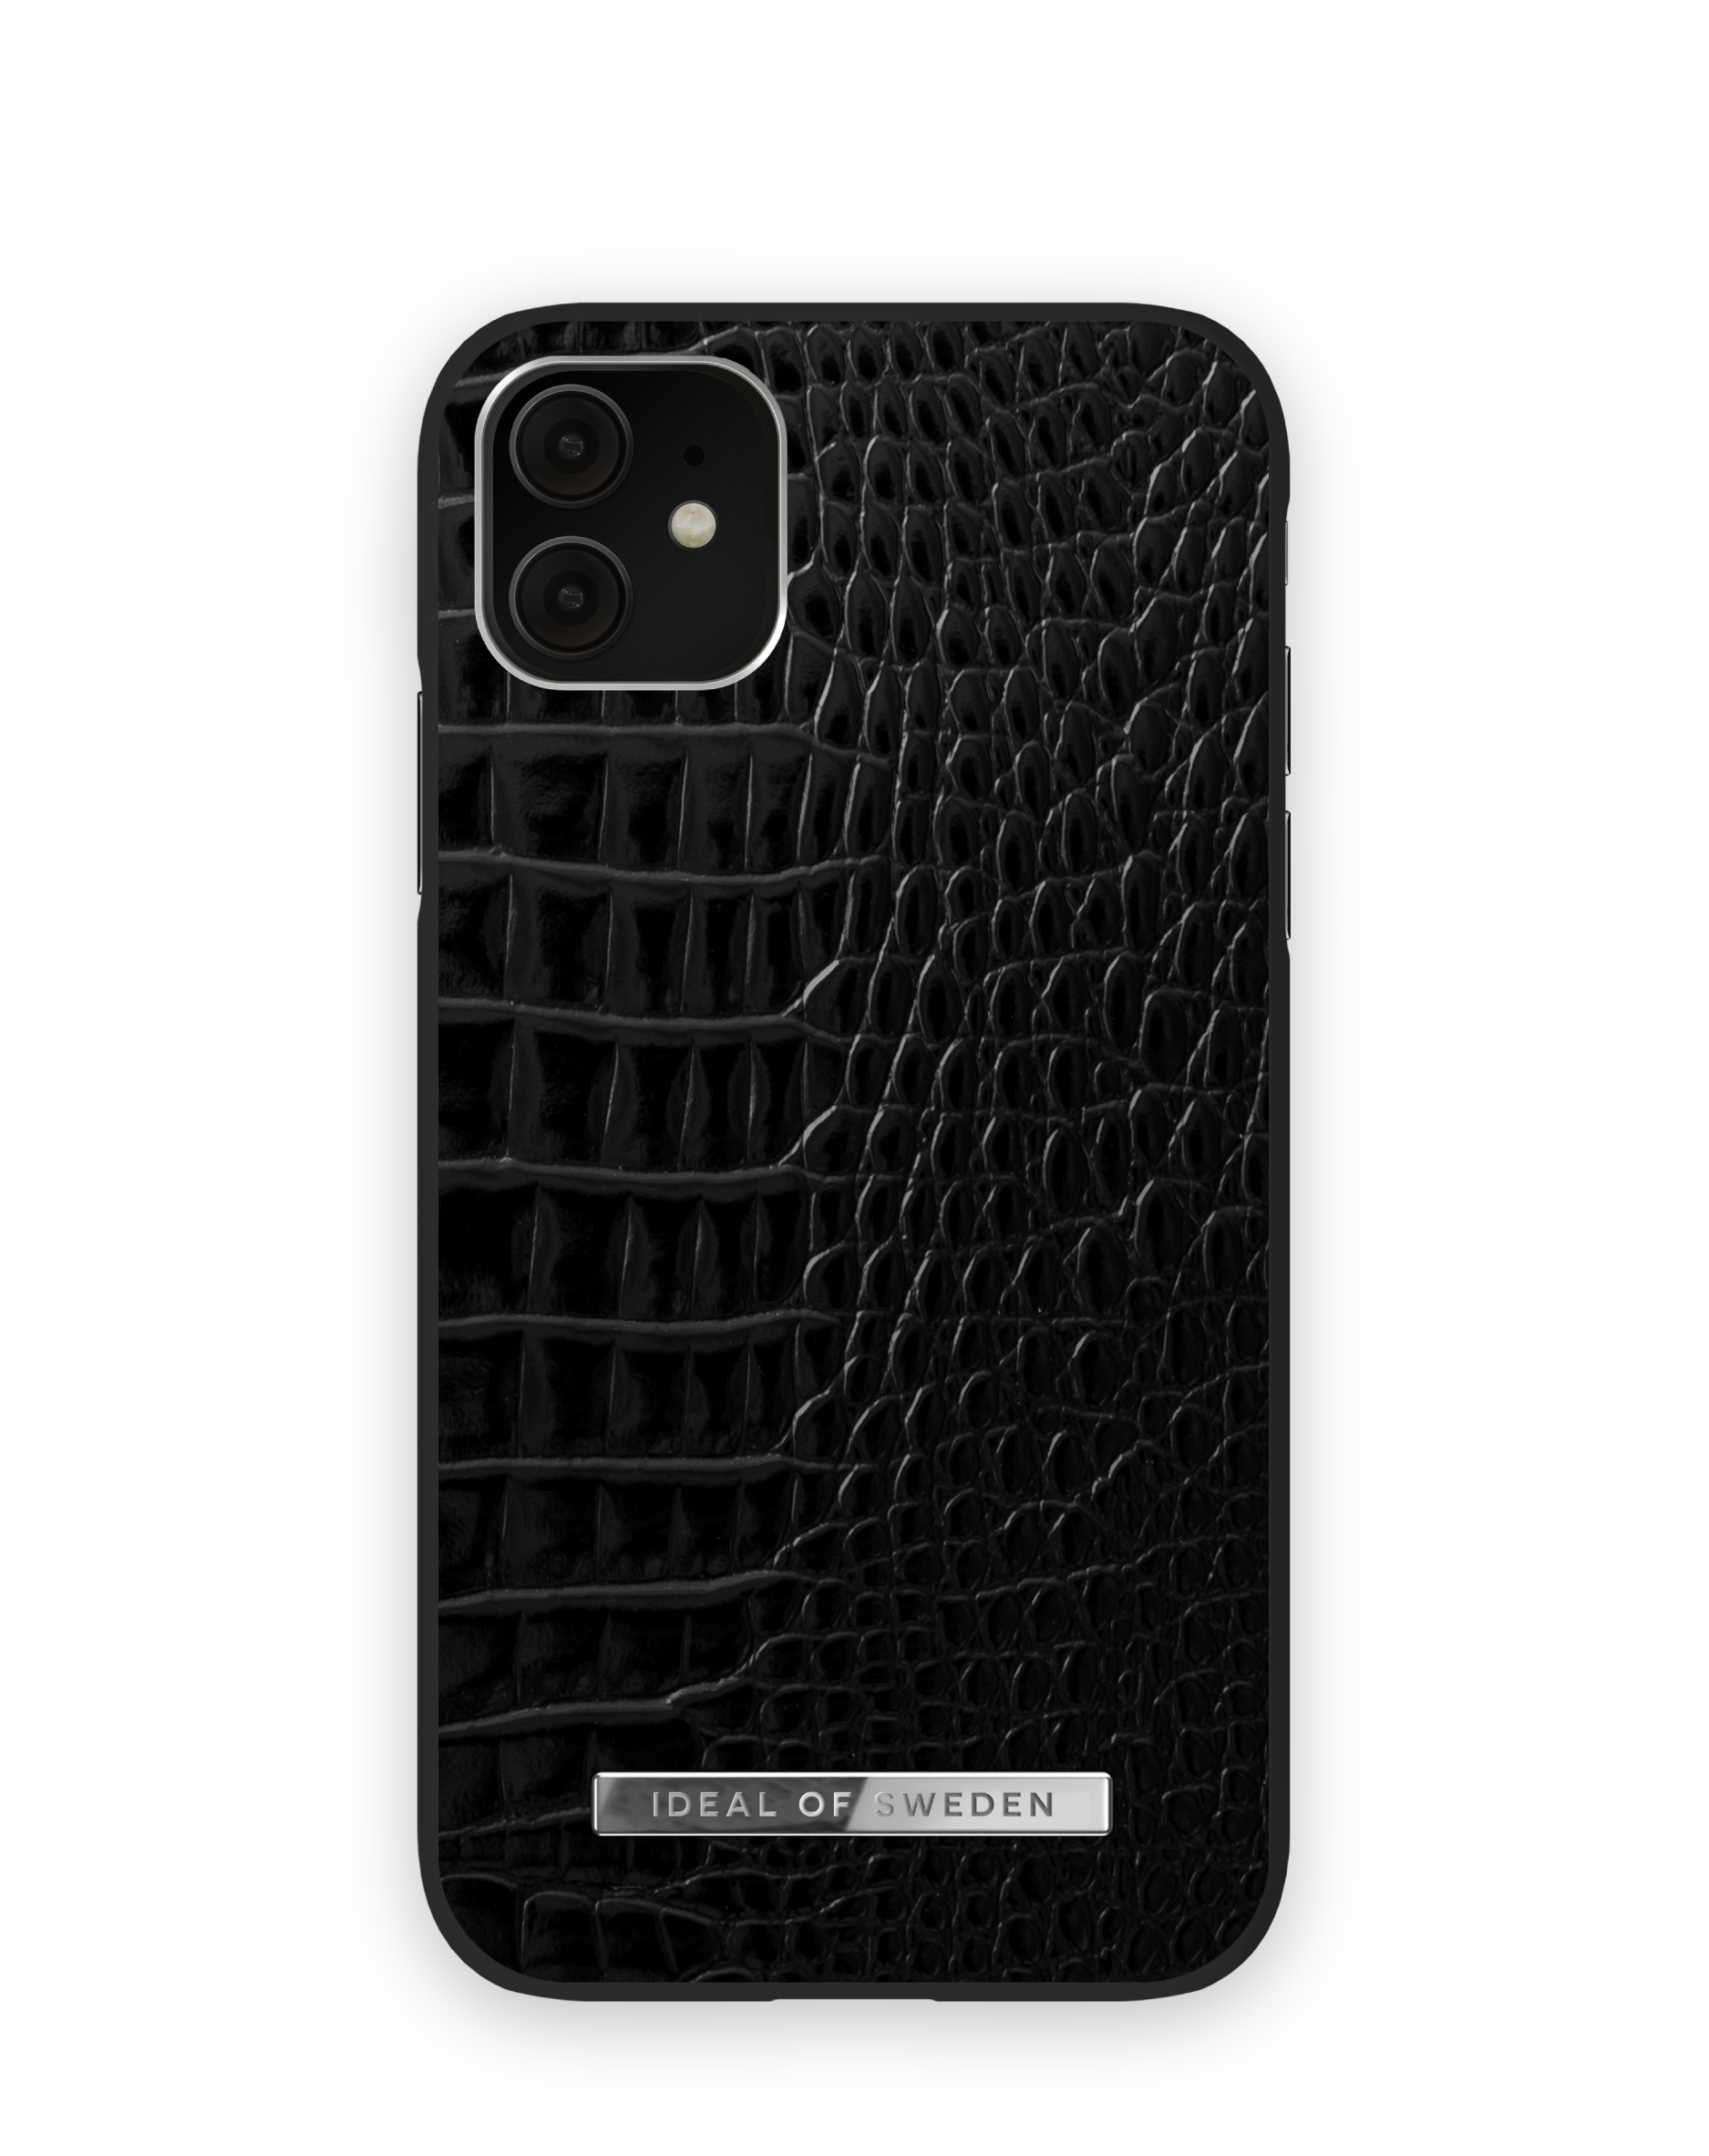 IDACSS21-I1961-306, Apple OF SWEDEN Backcover, Silver Apple, Noir Neo XR, Croco iPhone iPhone 11, Apple IDEAL